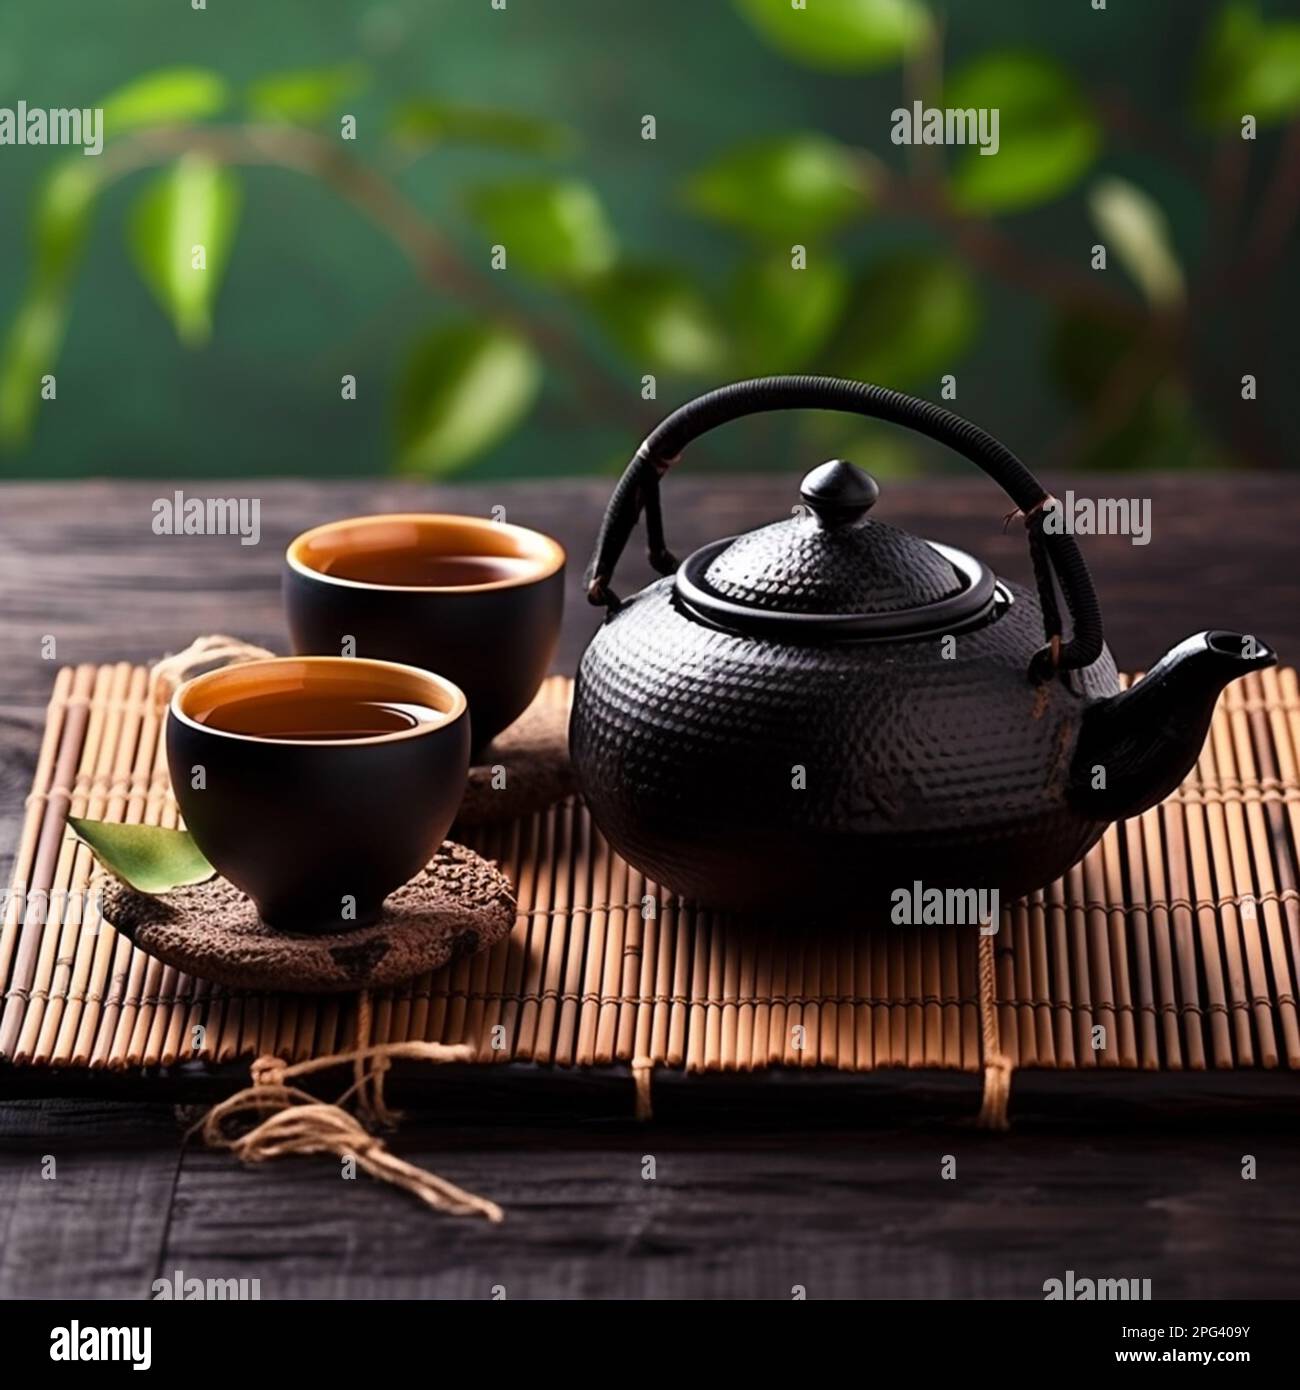 https://c8.alamy.com/comp/2PG409Y/asian-tea-set-hot-tea-in-pot-and-teacups-japanese-teapot-and-cups-on-bamboo-mat-2PG409Y.jpg